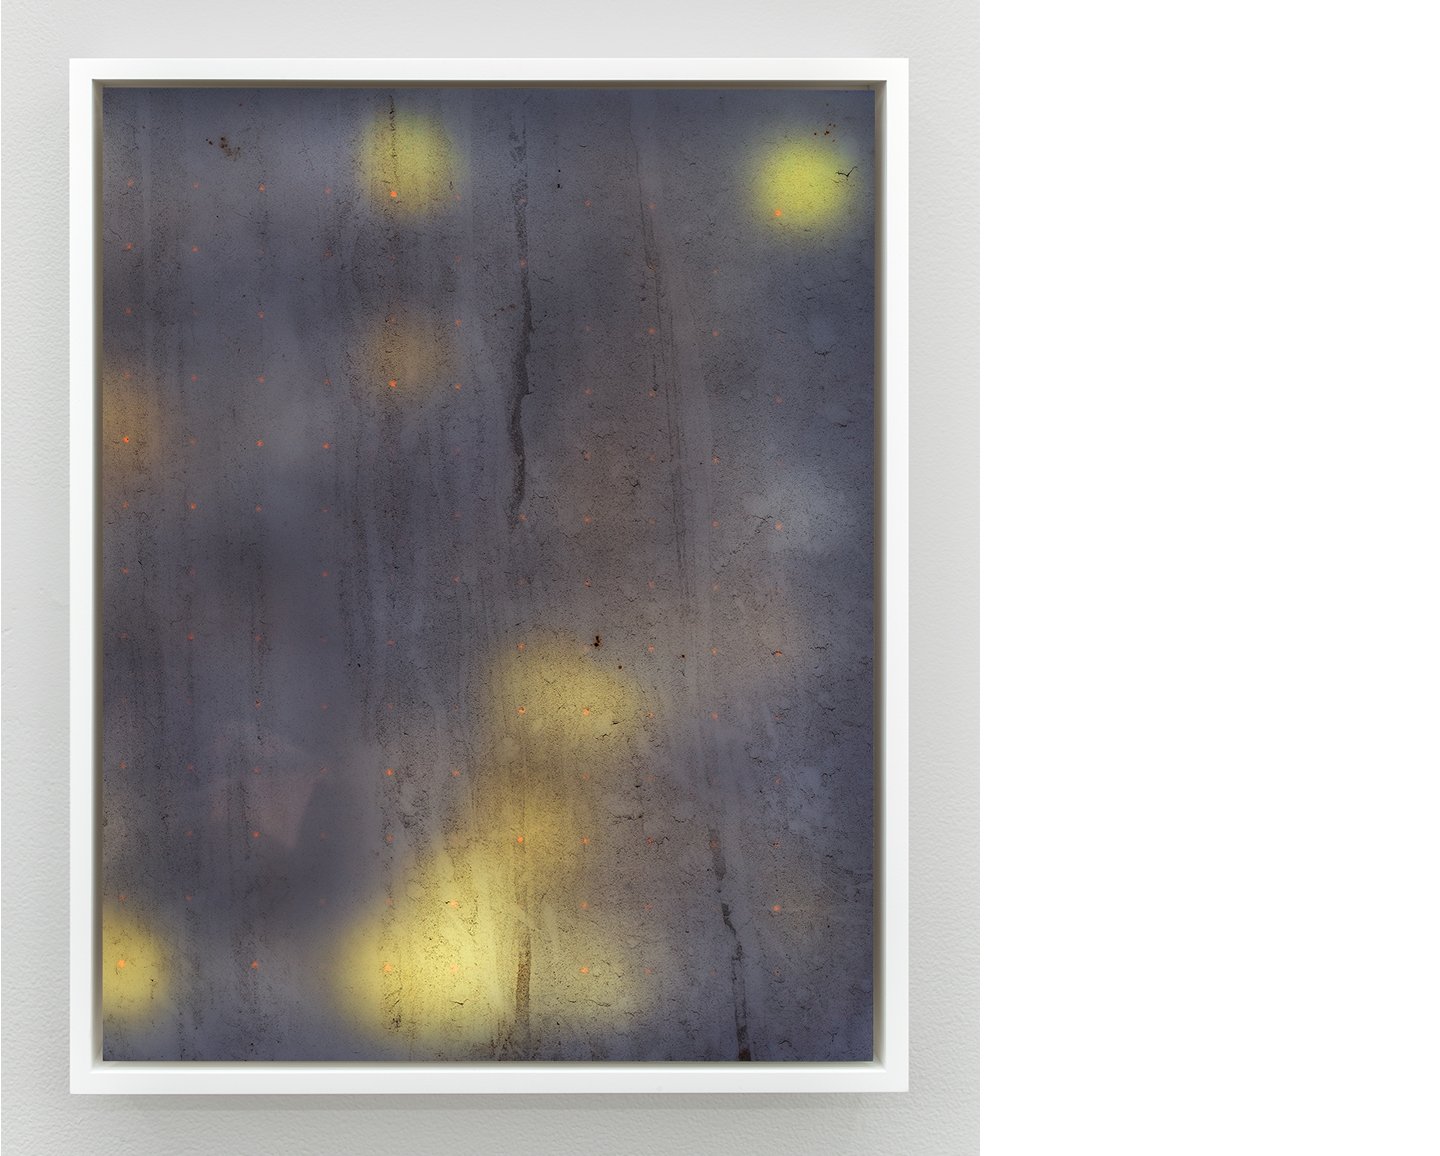   LED , 2015 Pigmented Inkjet Print Wood Frame 10.5” x 13.25” Edition of 5 plus 2 Artist Proofs 